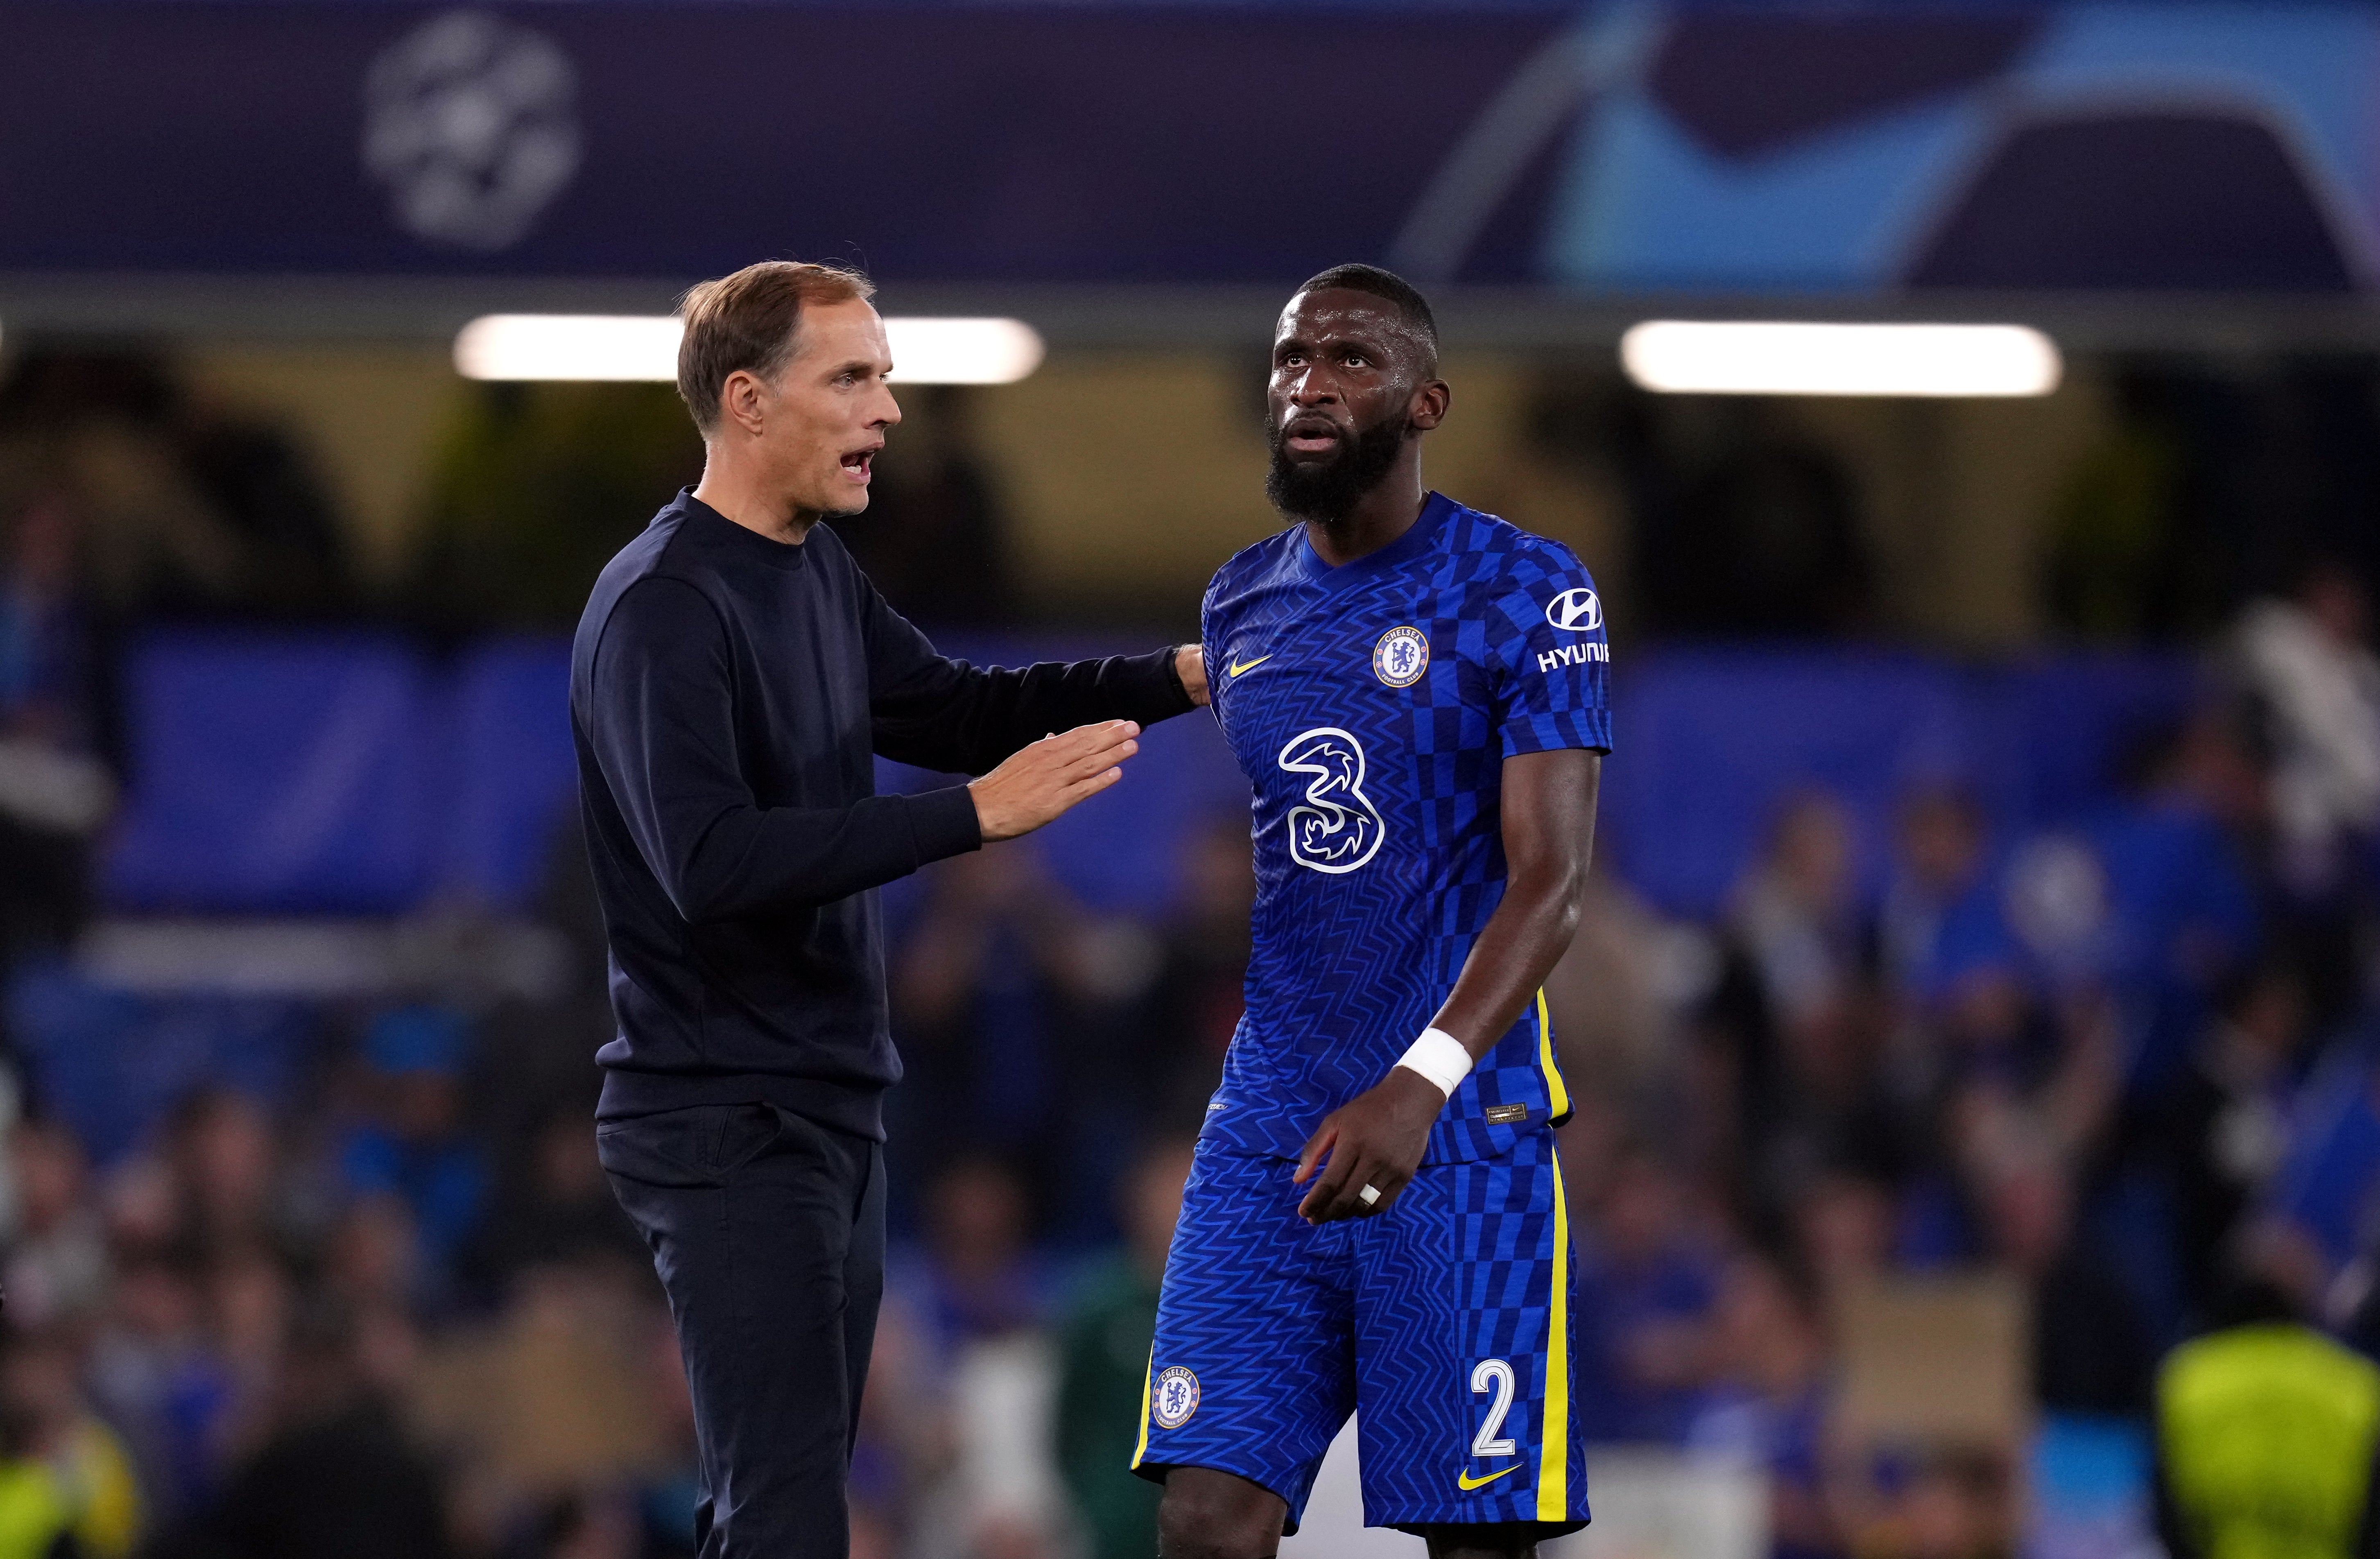 Thomas Tuchel, left, chats with Toni Rudiger, right, after Chelsea’s 1-0 Champions League win over Zenit St Petersburg (John Walton/PA)